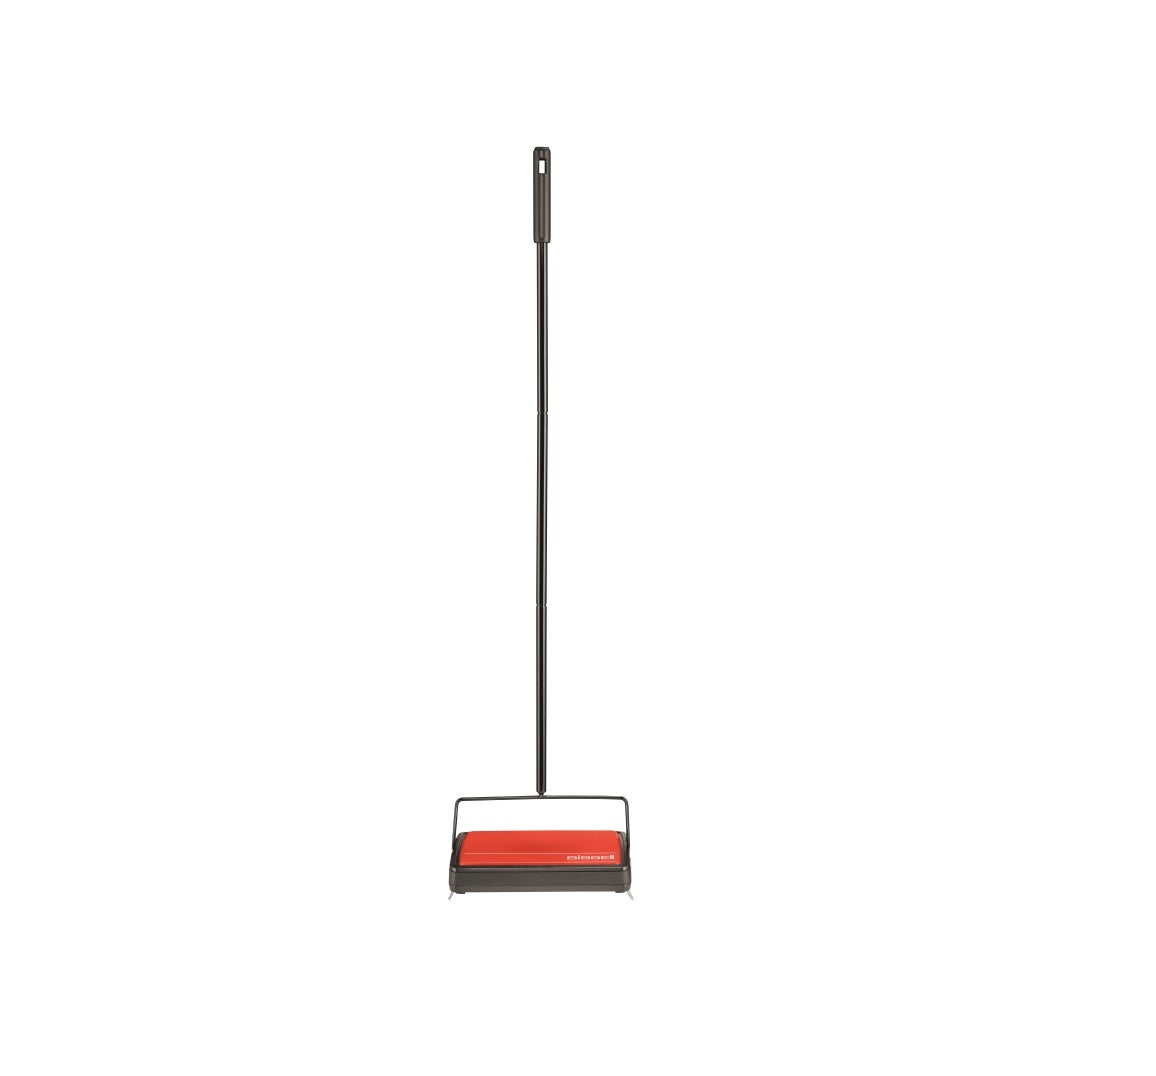 Bissell 2483 Refresh Carpet and Floor Manual Sweeper, Orange, 9-1/2 inch